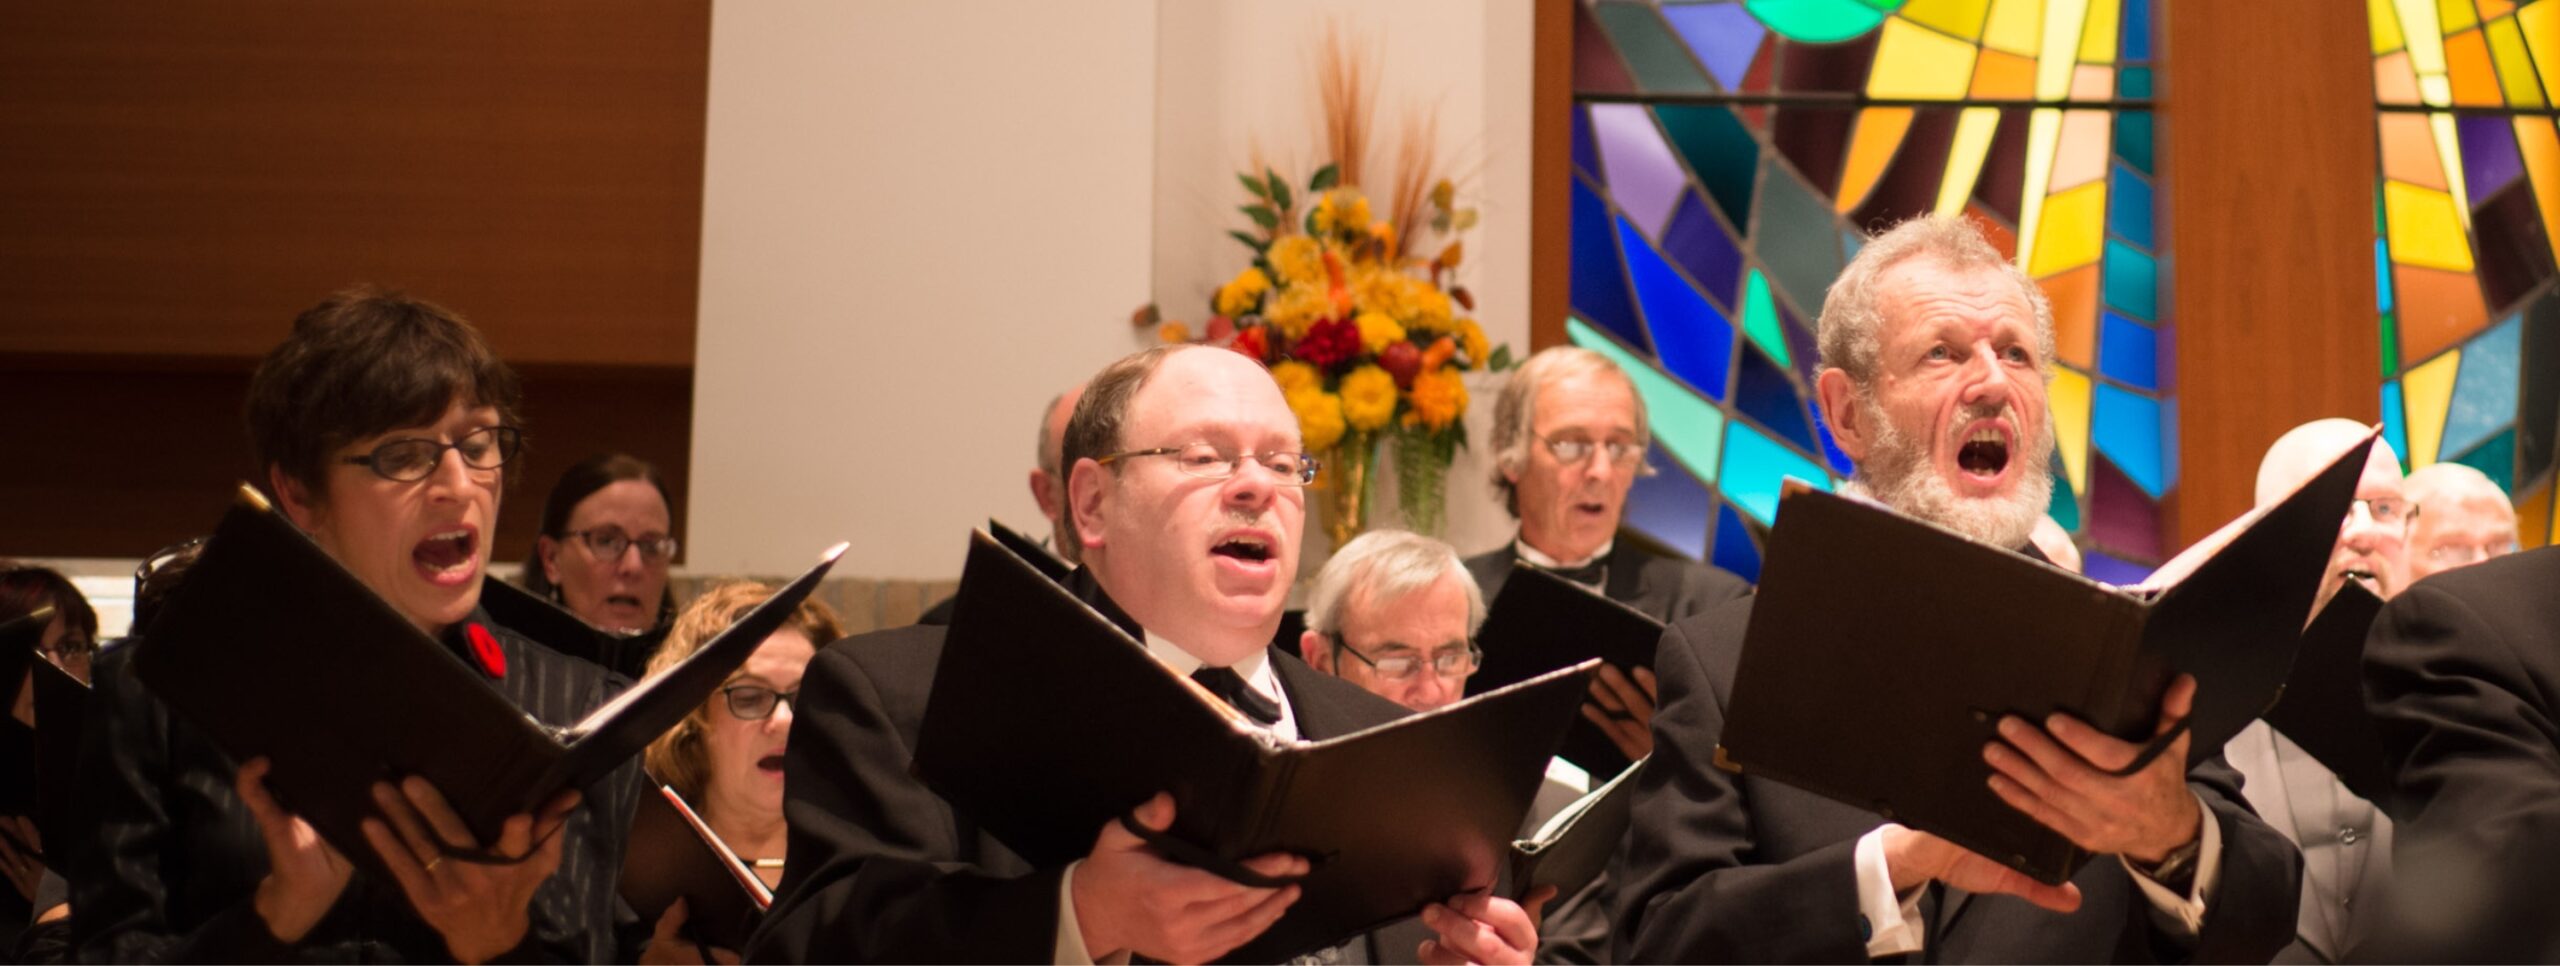 Closeup of three people singing in a choir in front of stained glass windows